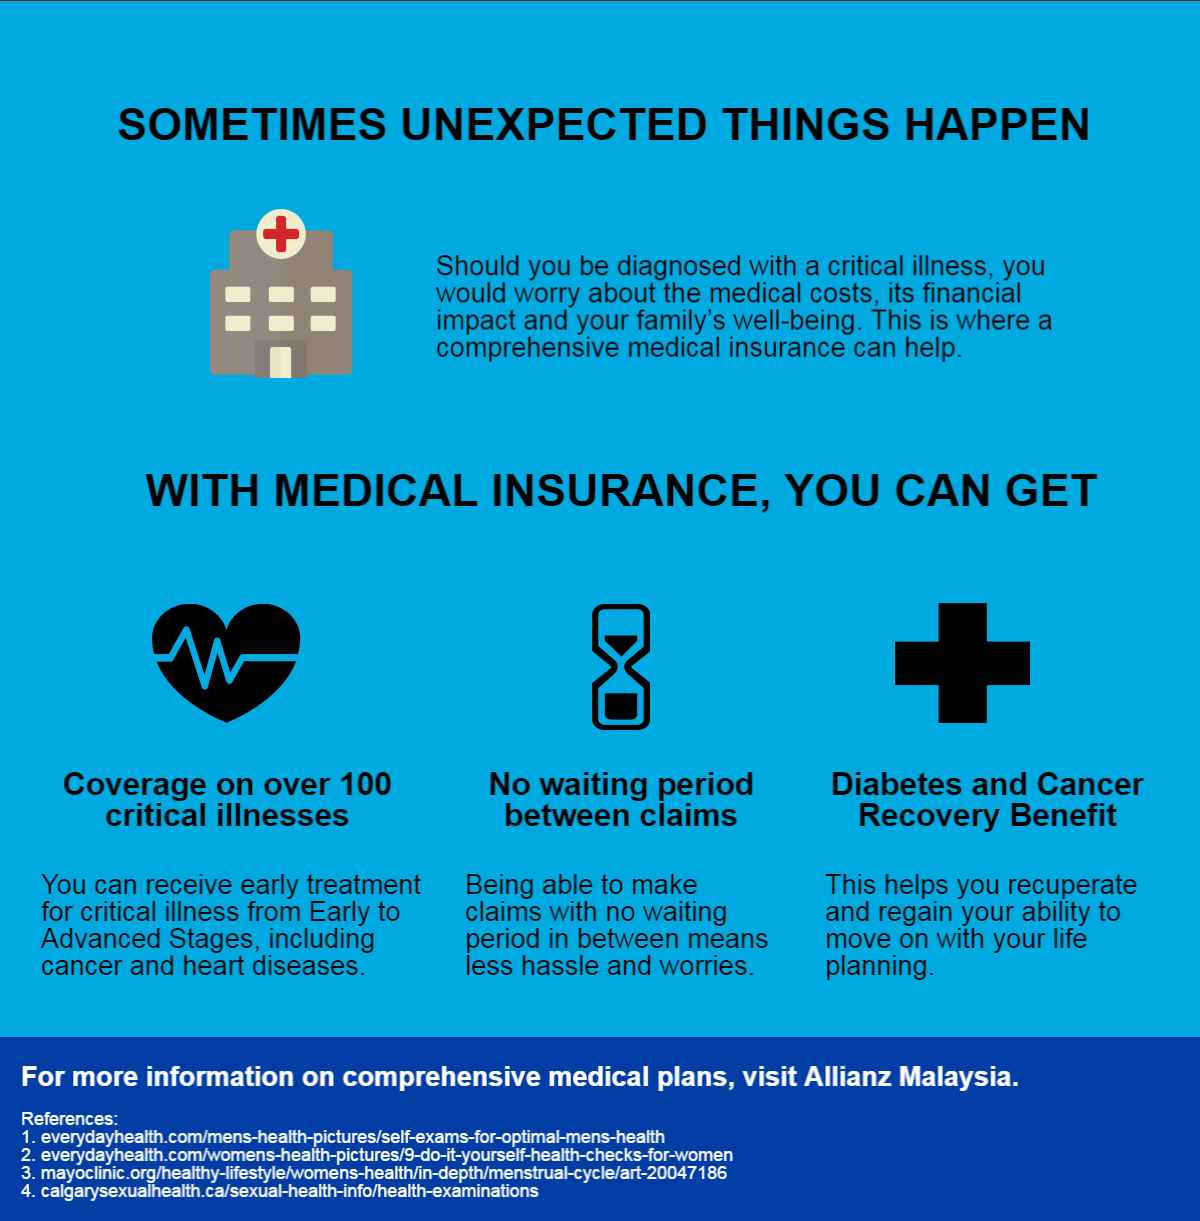 Your guide to a full body health check-up - Allianz Malaysia